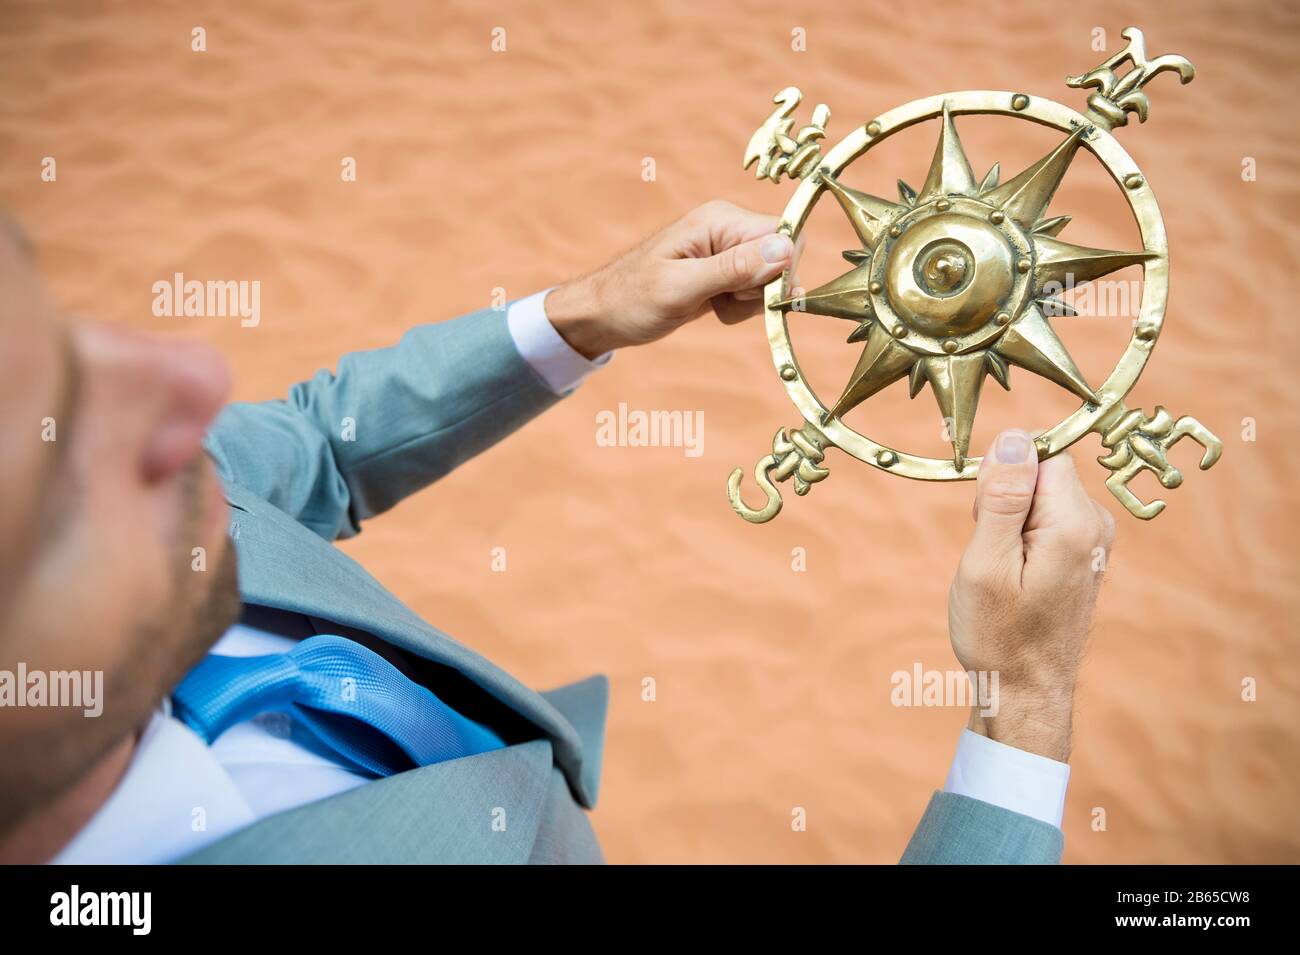 Lost businessman holding a traditional old-fashioned compass rose outdoors in the desert Stock Photo